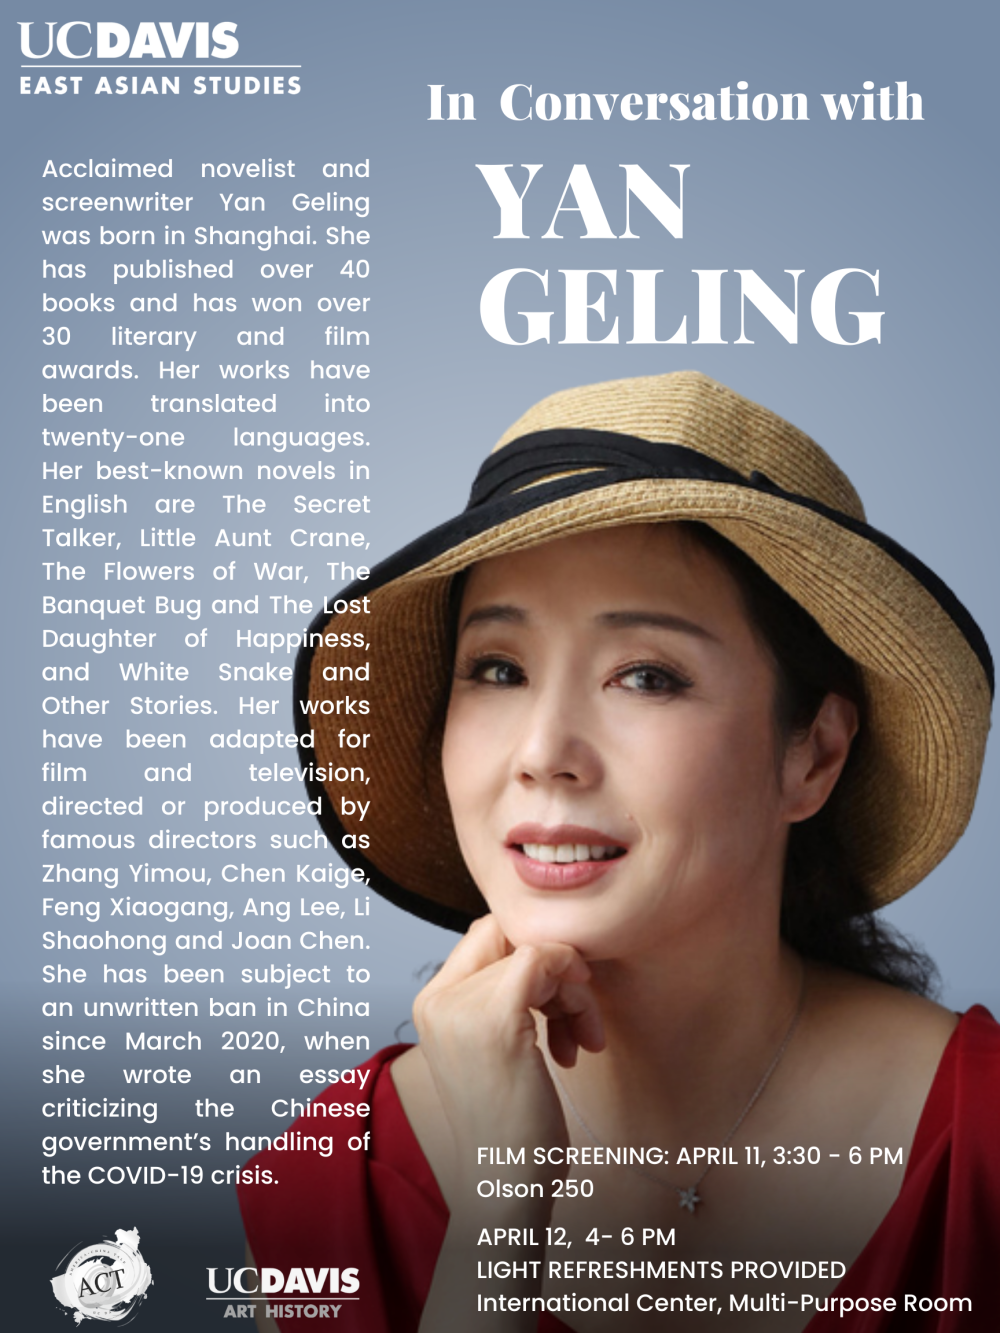 A flyer for the upcoming event, featuring a photo of Yan Geling in a red dress and straw hat